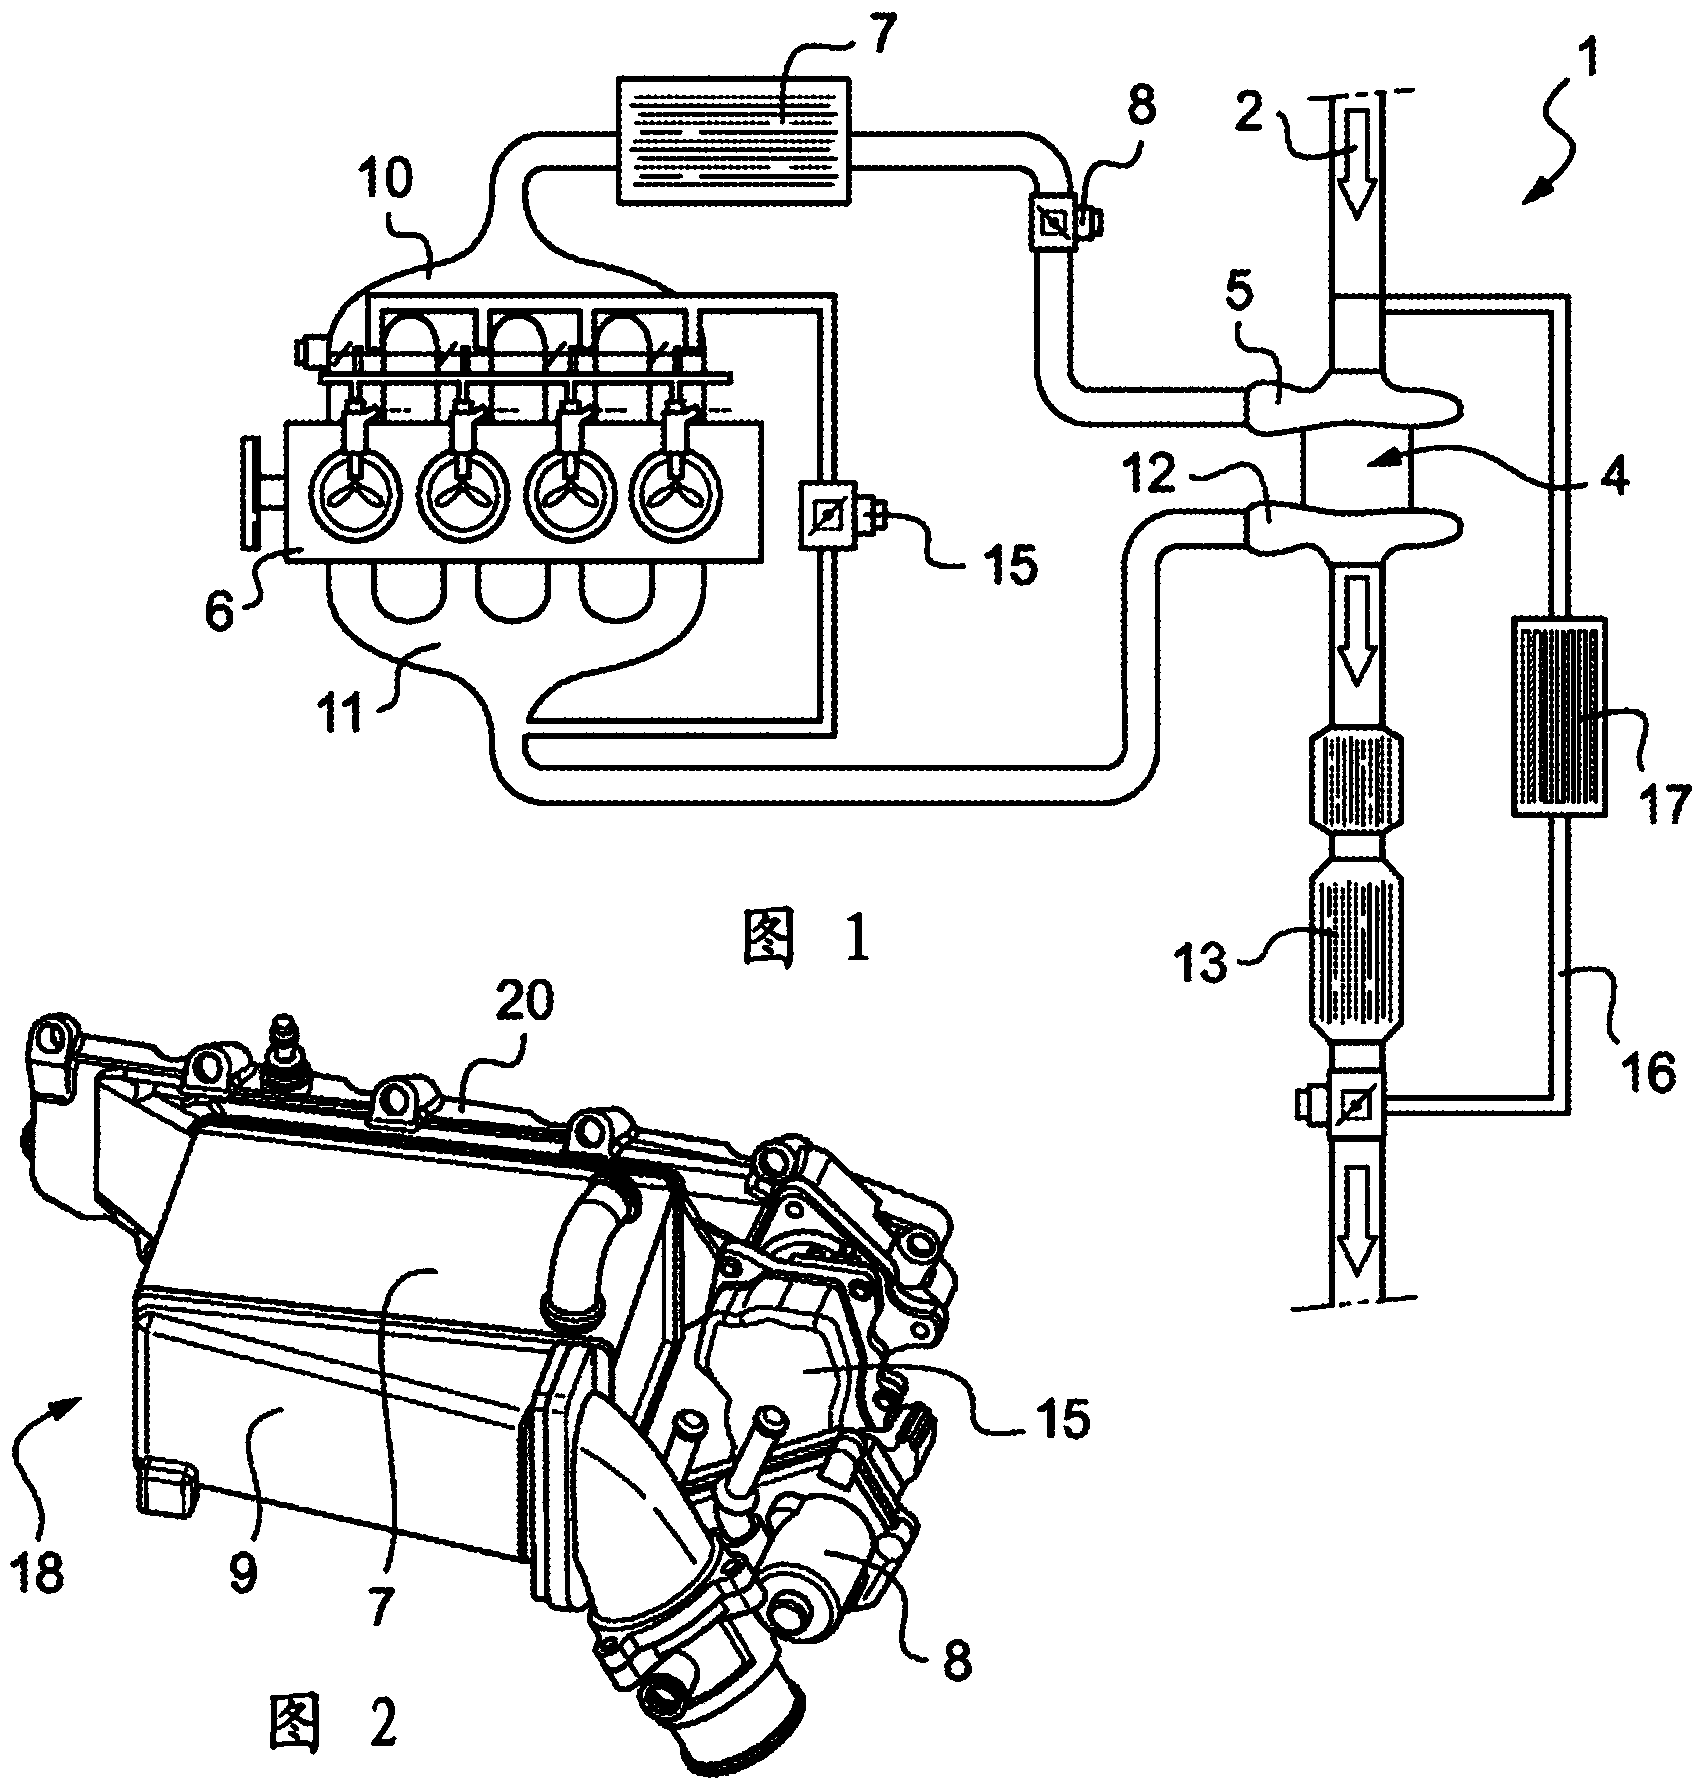 Module for supplying gas to a motor vehicle engine